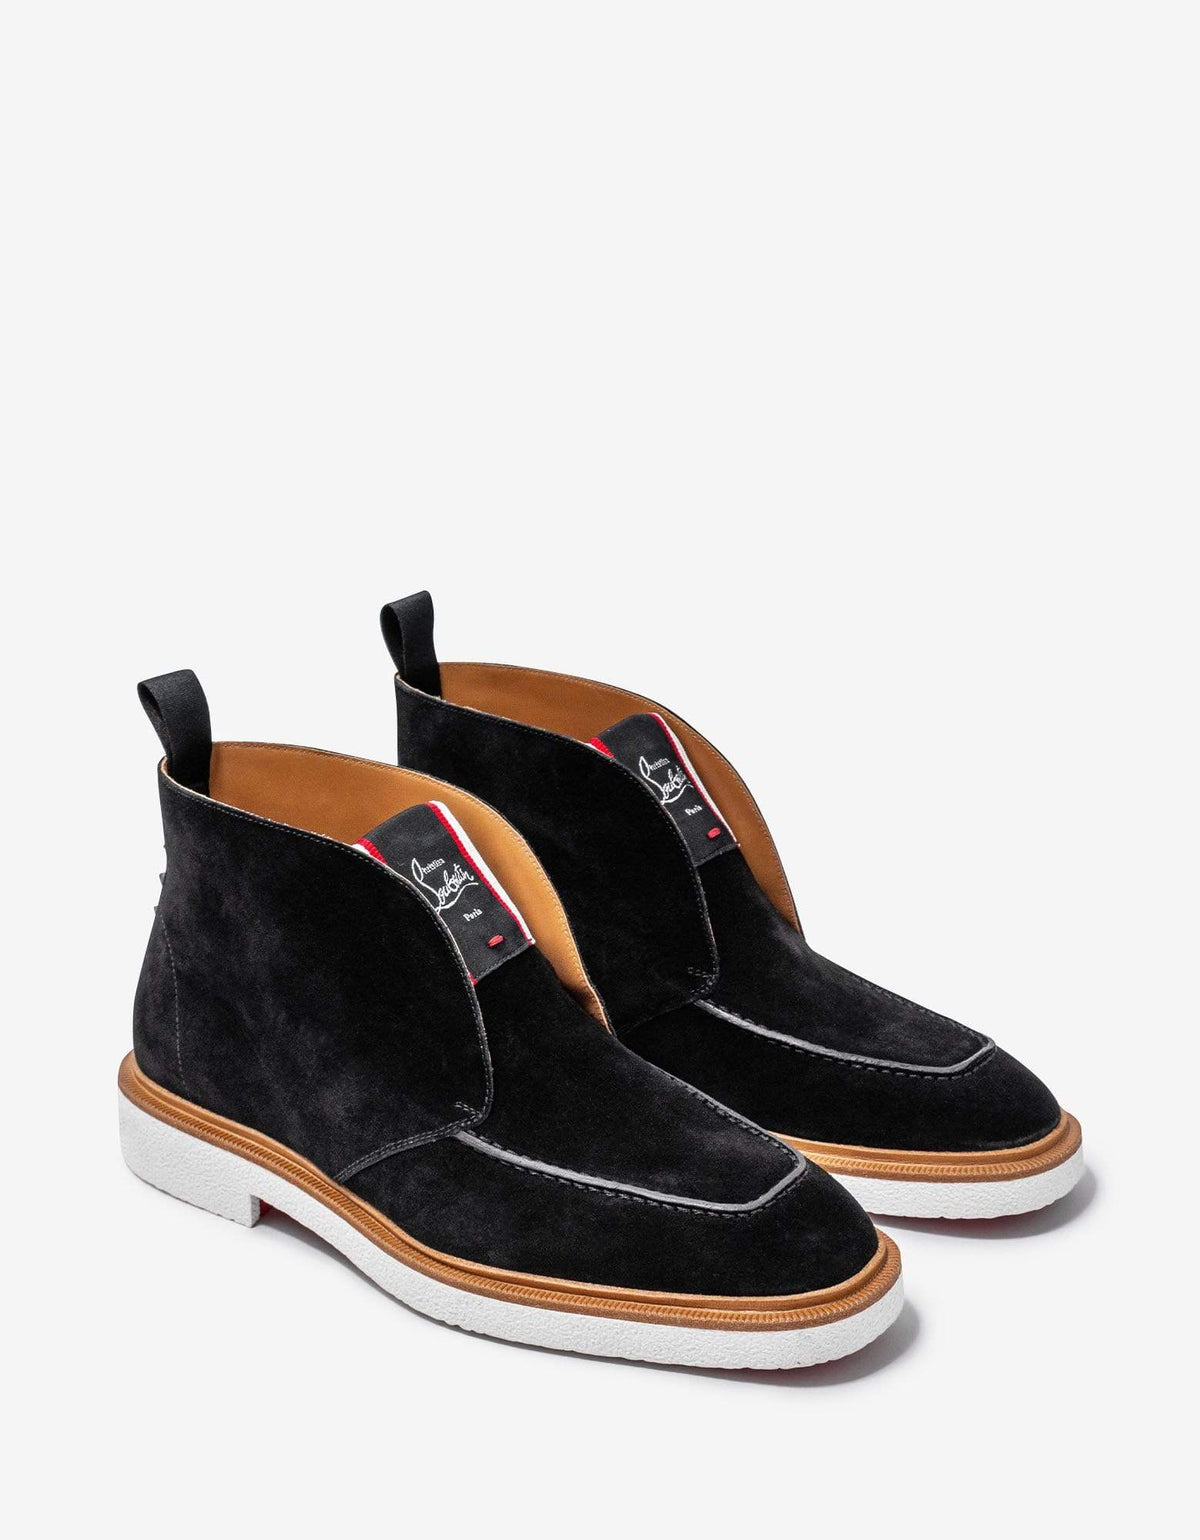 Christian Louboutin Citycrepe Black Suede Ankle Boots